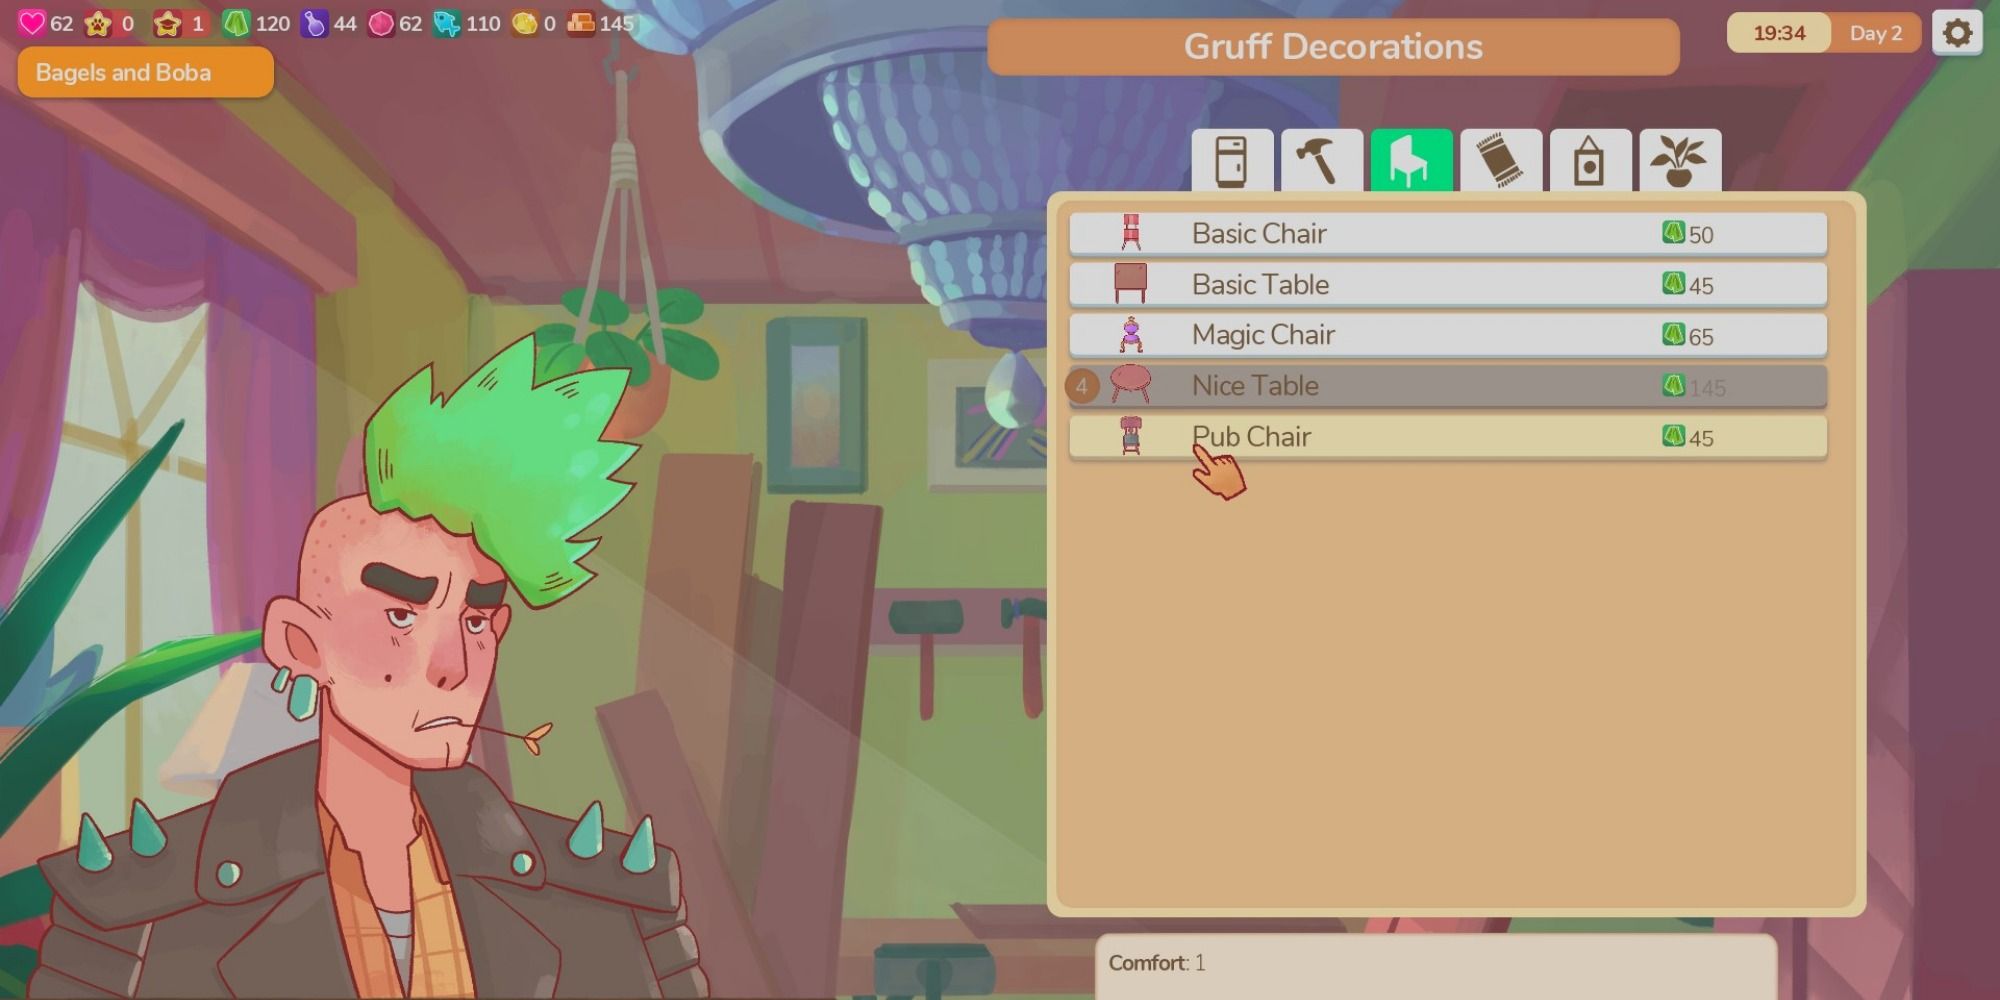 Arwel sitting at the counter of Gruff Decorations with buy menu to the right